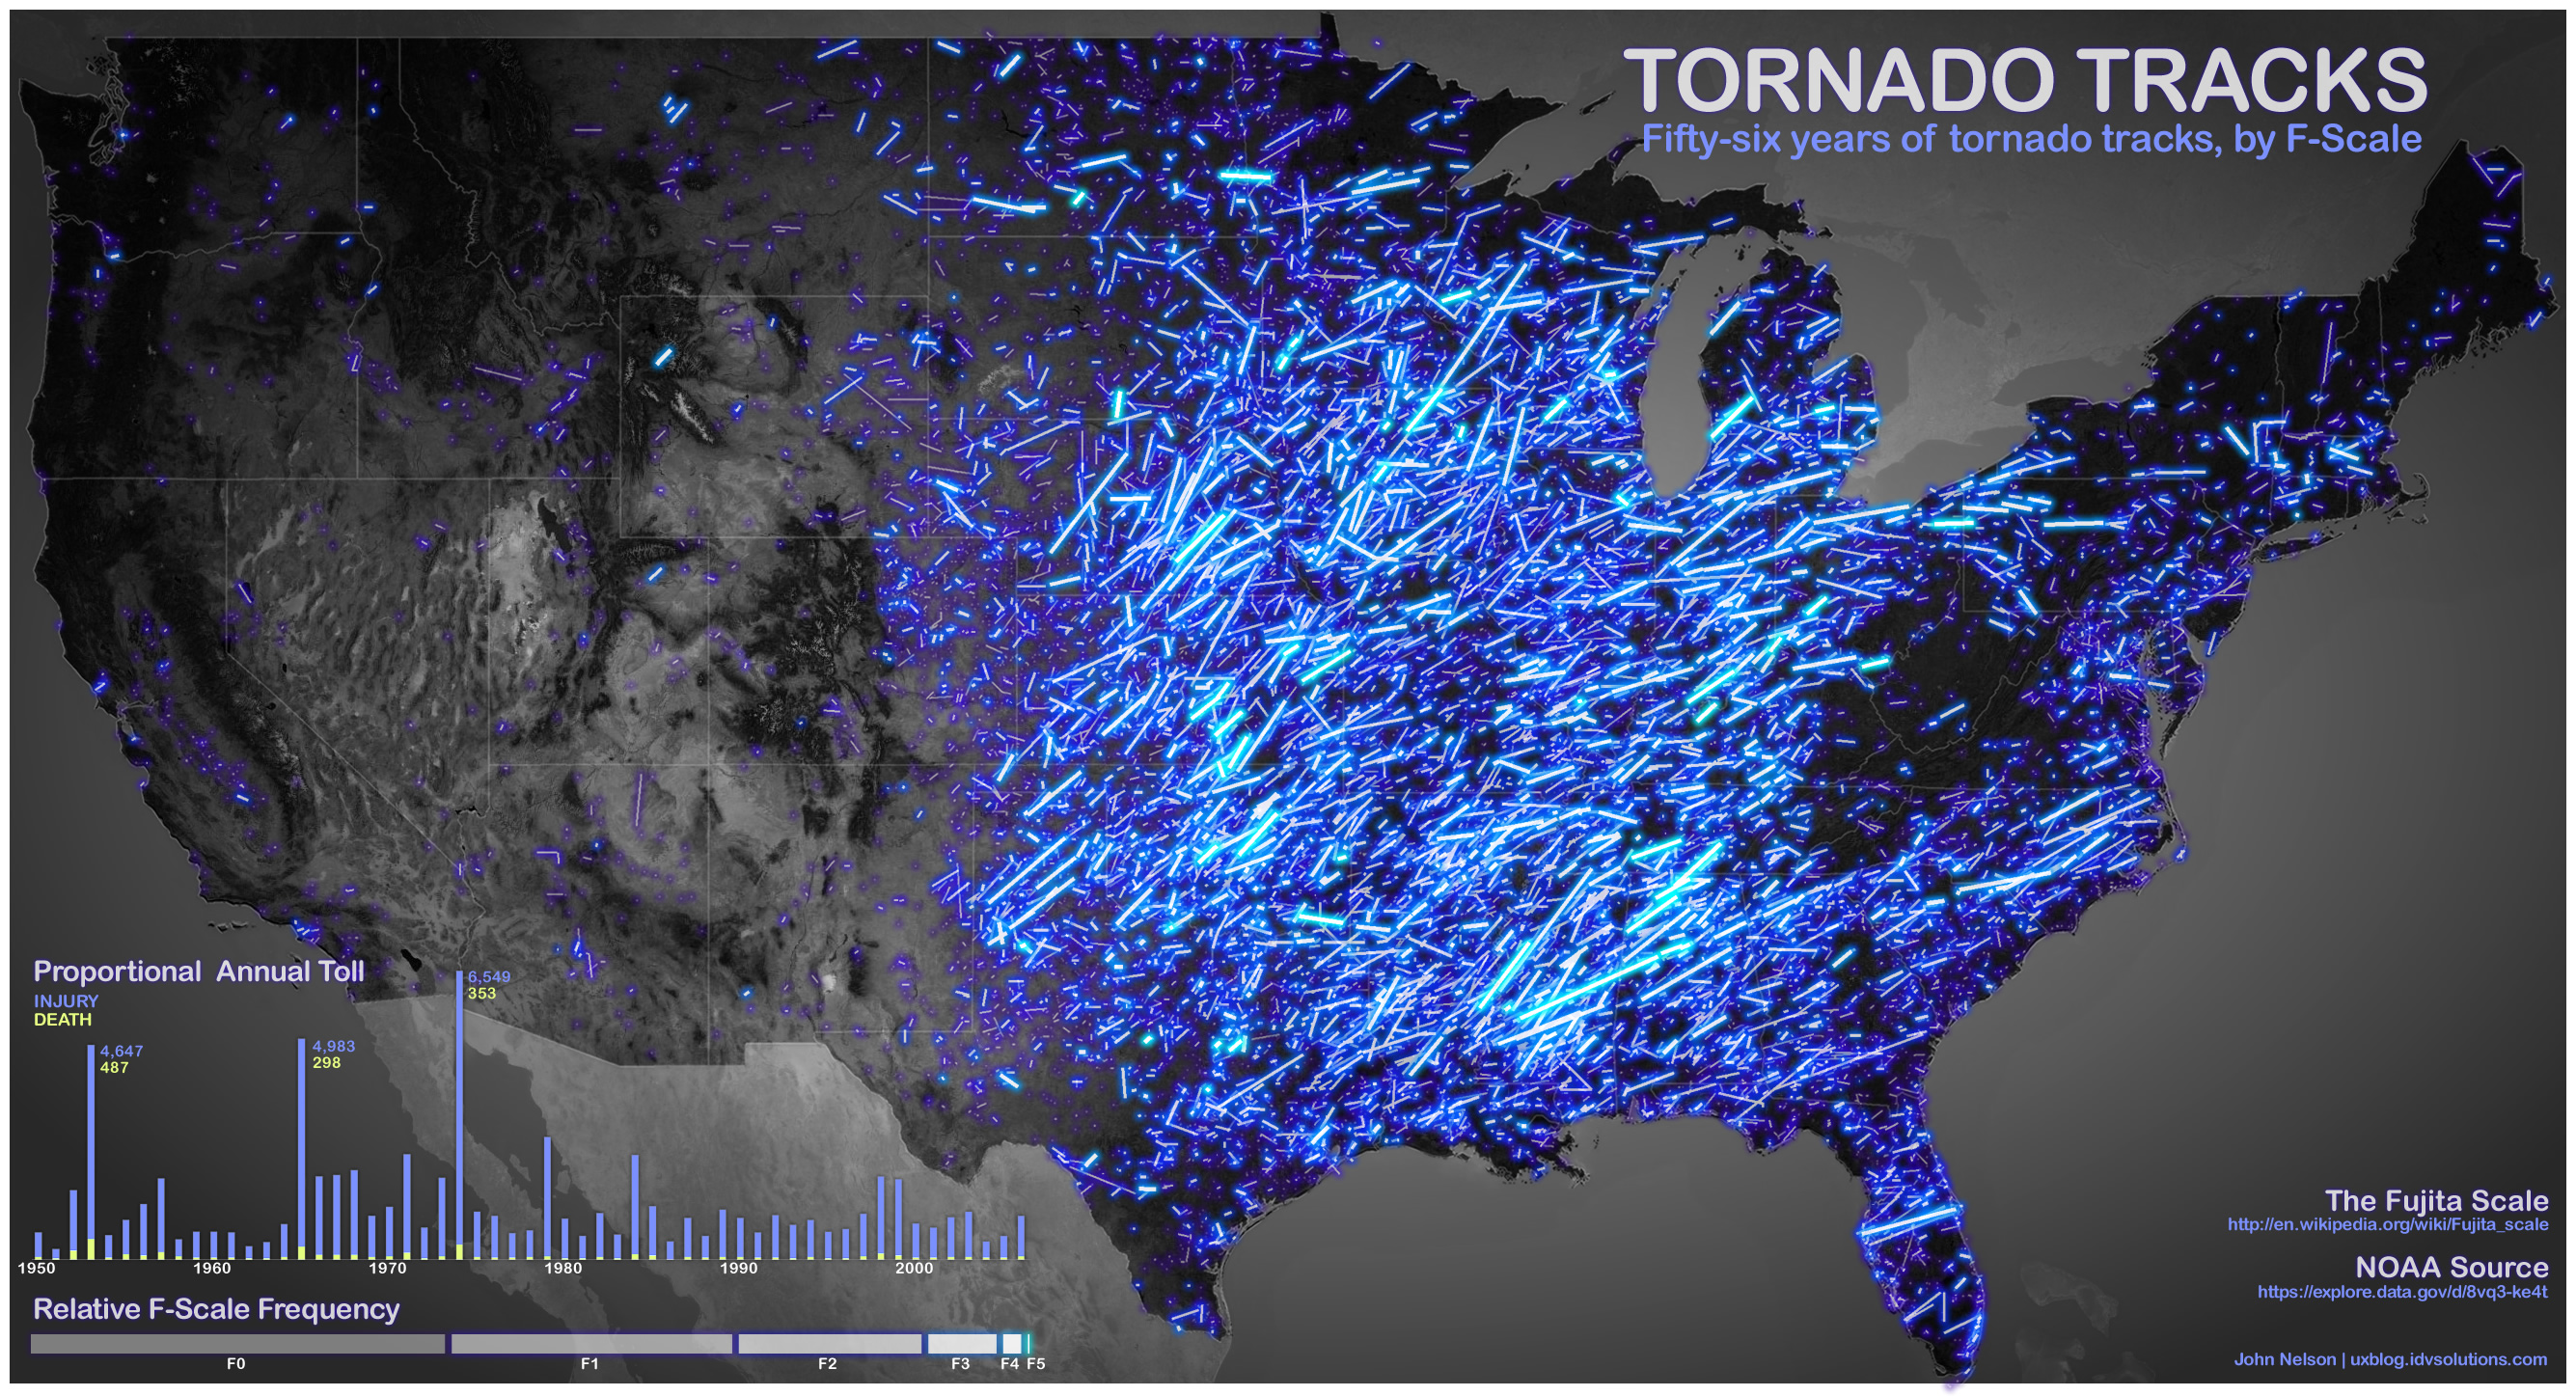 Stunning map of NOAA data showing 56 years of tornado tracks sheds